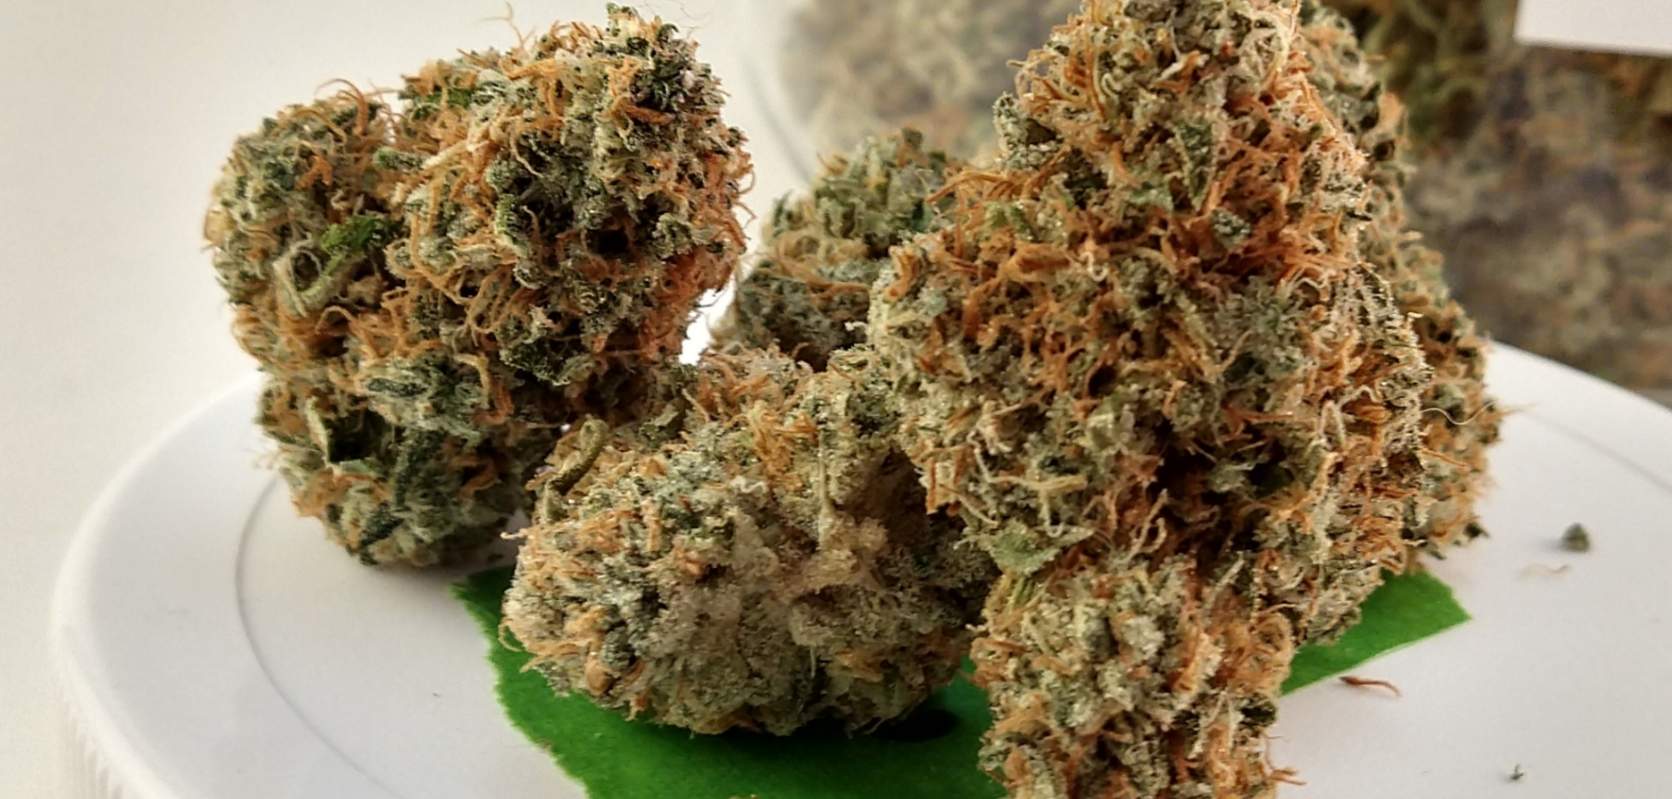 Do you know what strains of cannabis are high in CBN? Simply choose any of the strains listed in this article and you’ll be well on the right CBN track.